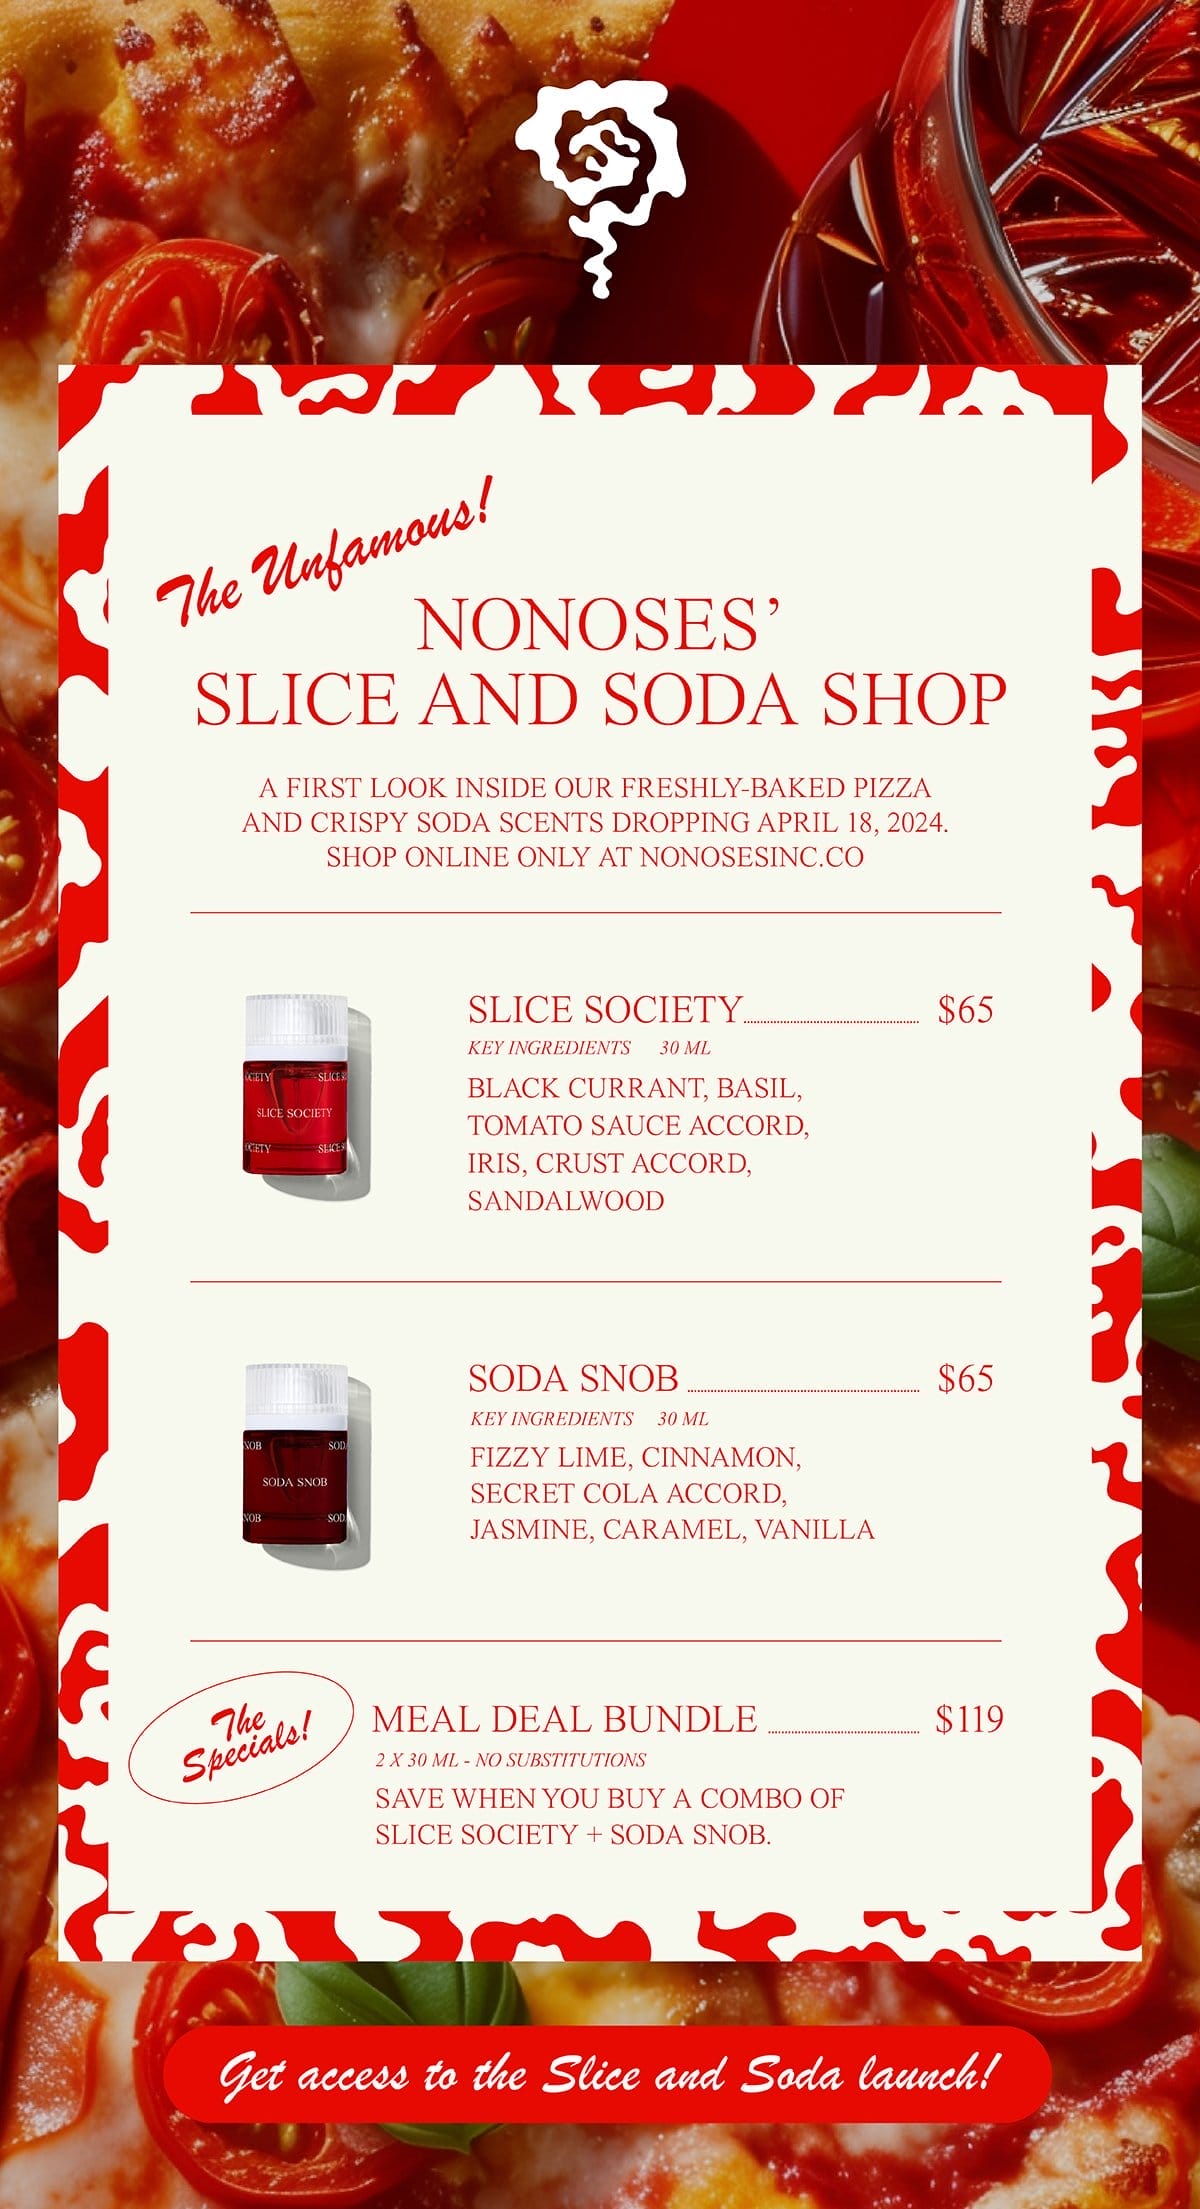 Sign up for access to the Slice and Soda drop. ↗